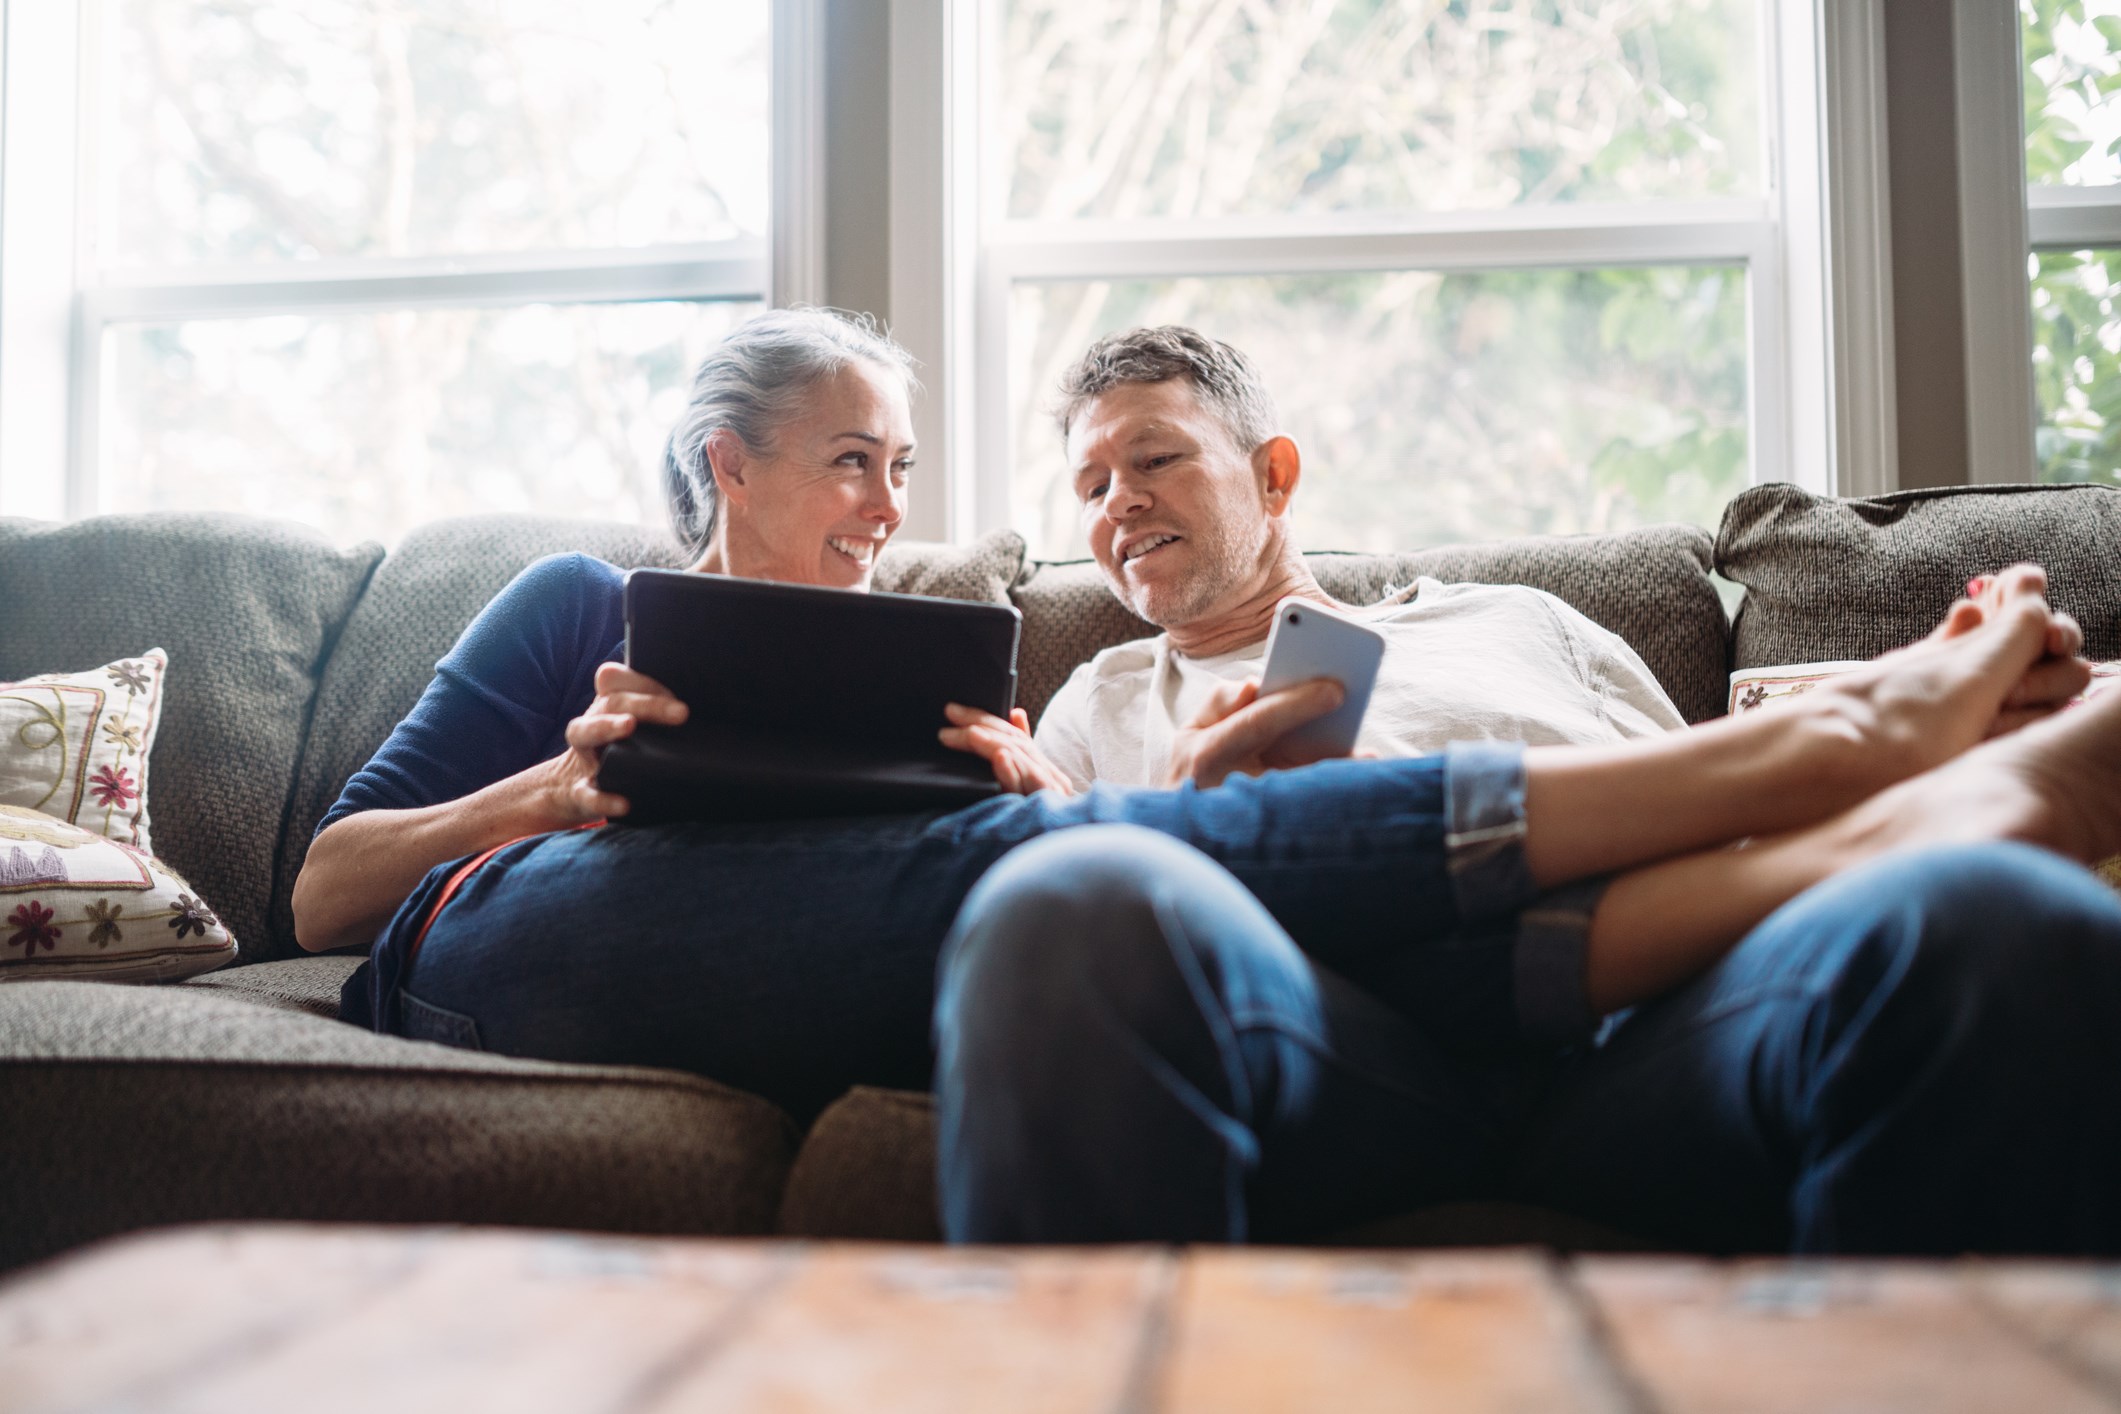 Couple on sofa, looking at tablet and mobile phone